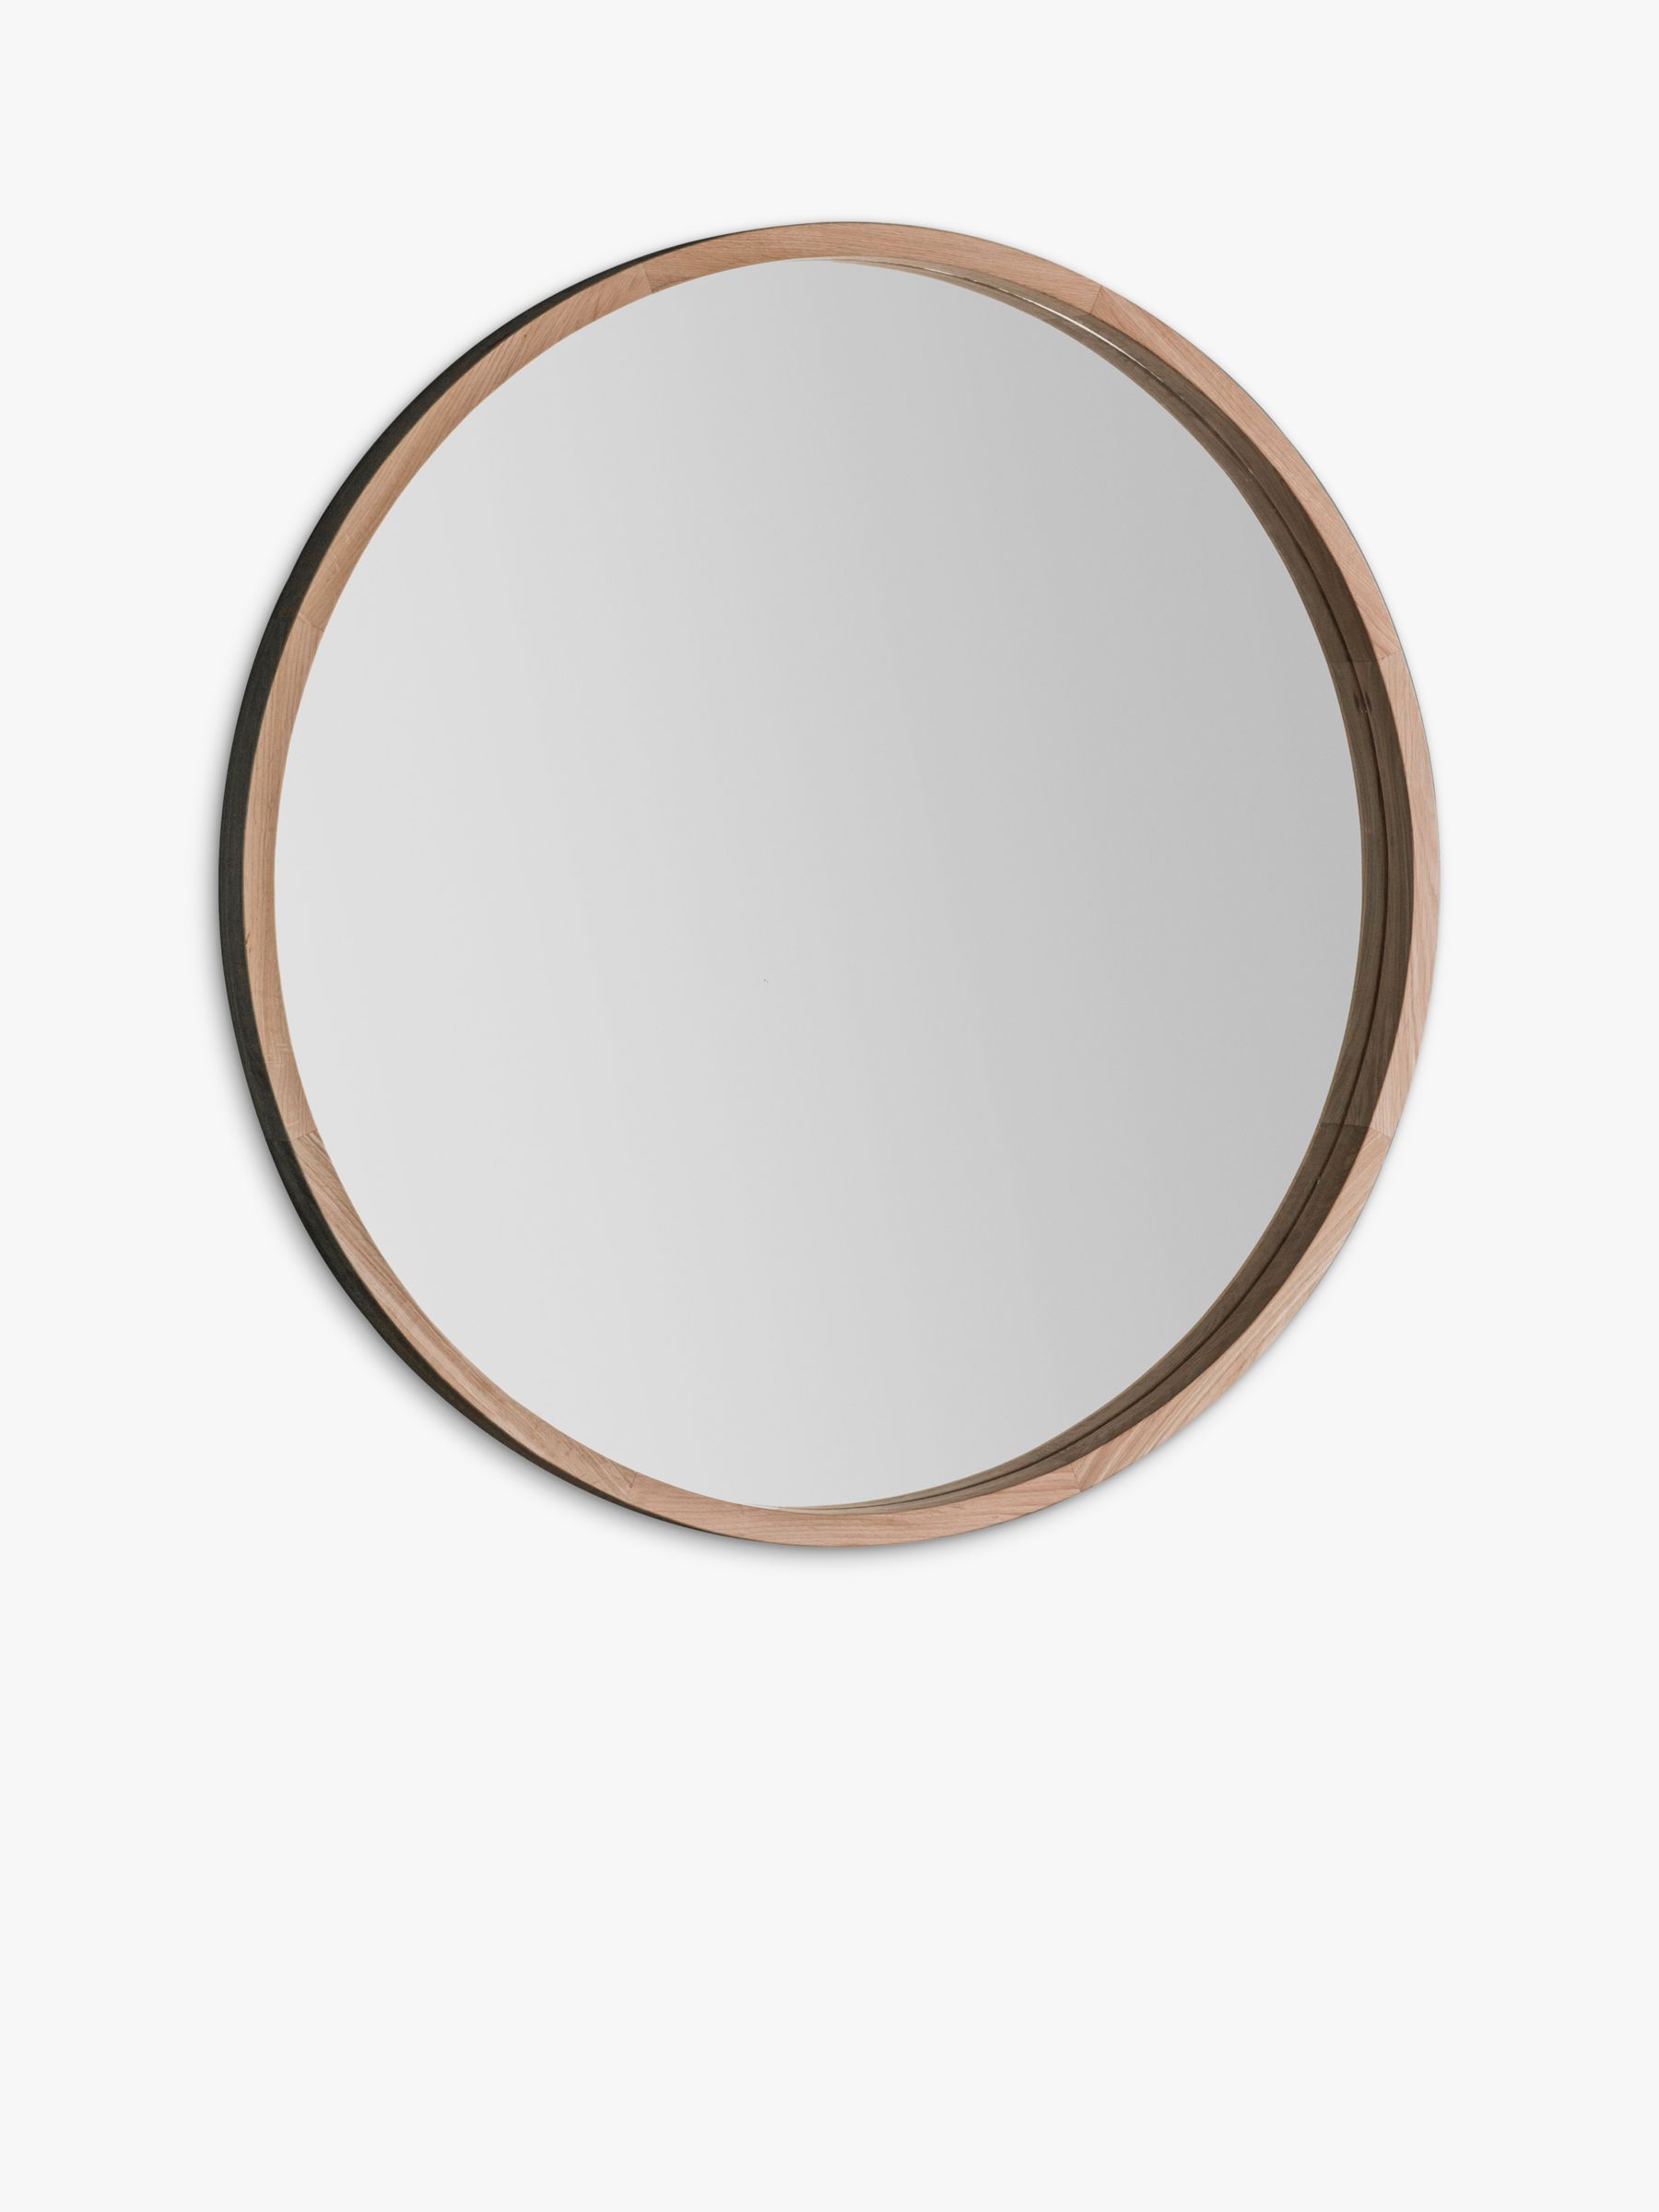 Bowman Large Round Oak Wood Frame, Large Round Mirror With Natural Wood Frame